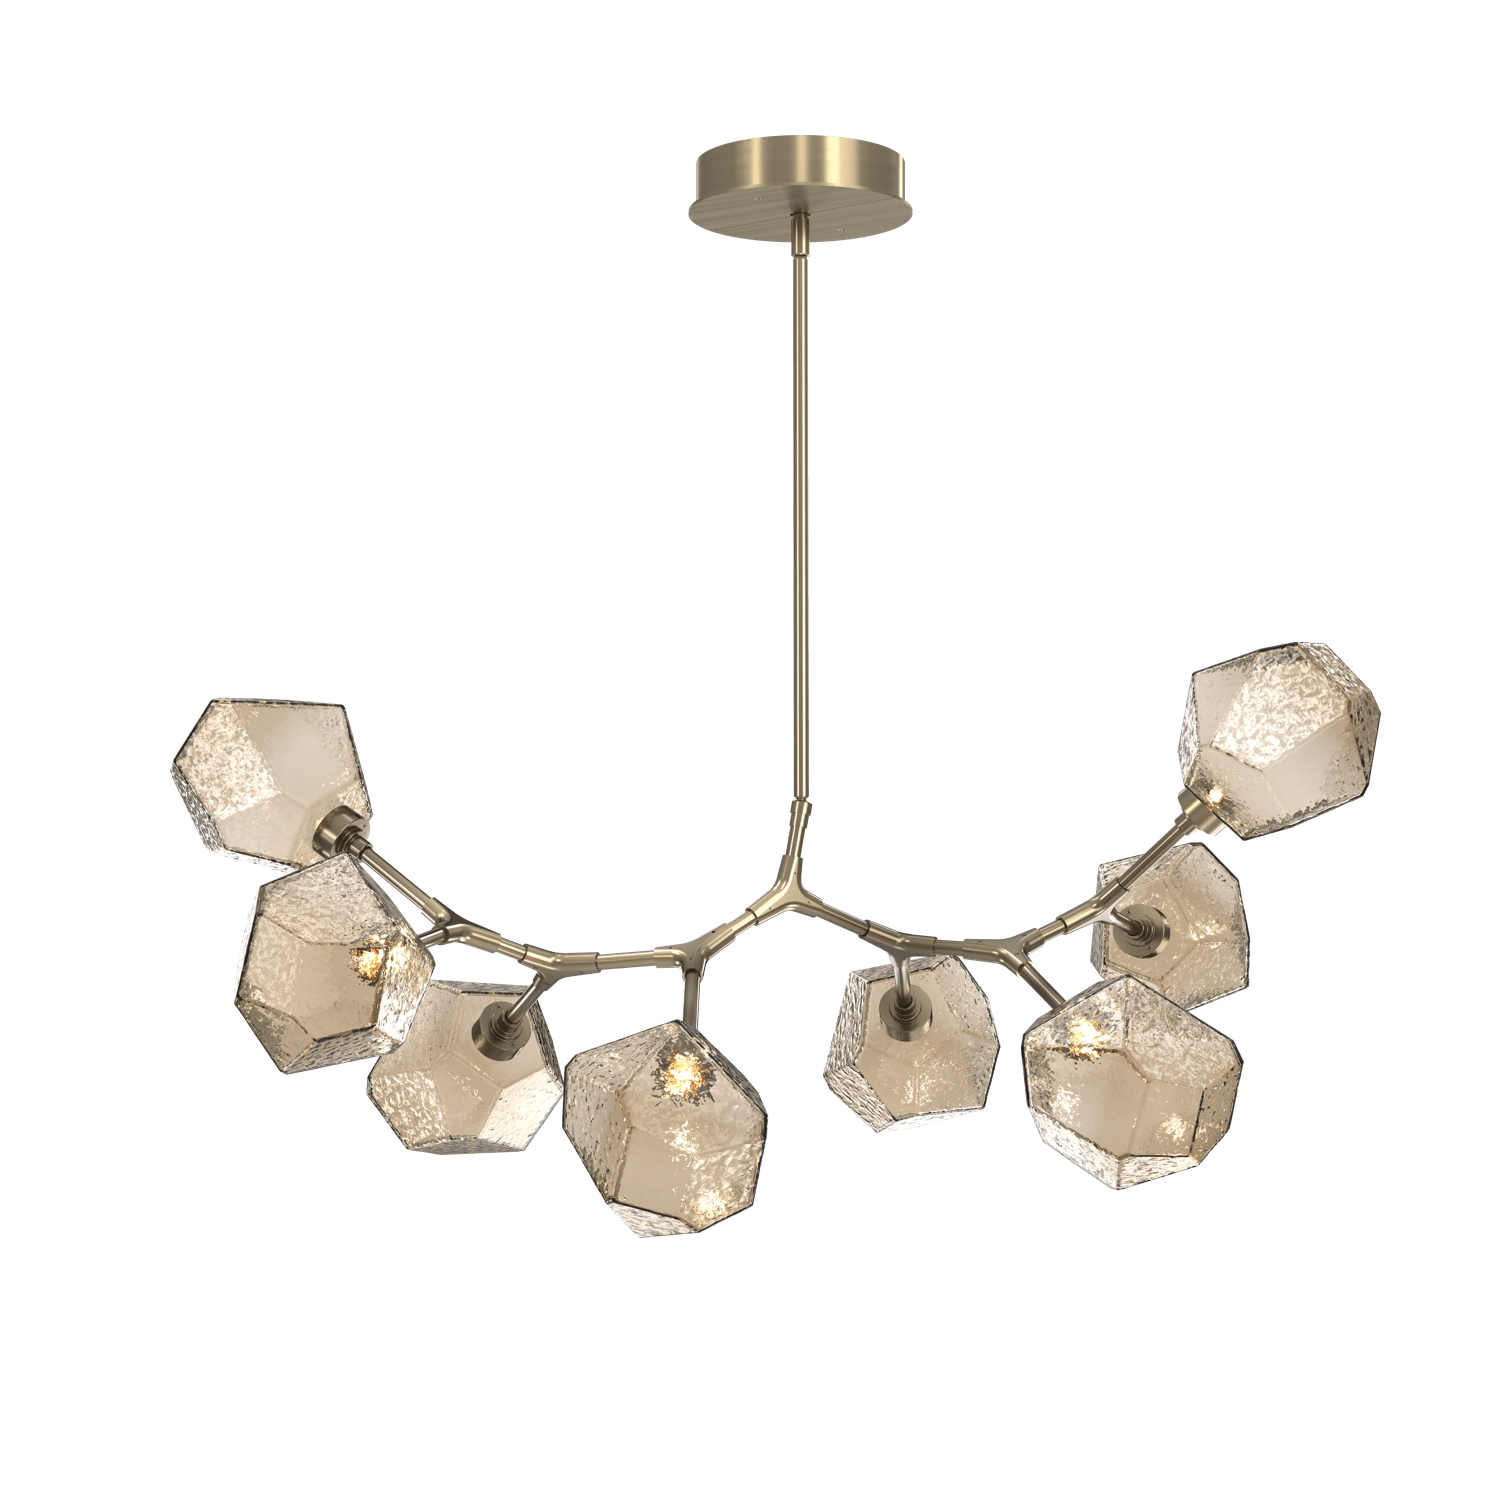 PLB0039-BB-HB-B-Hammerton-Studio-Gem-8-light-modern-branch-chandelier-with-heritage-brass-finish-and-bronze-blown-glass-shades-and-LED-lamping